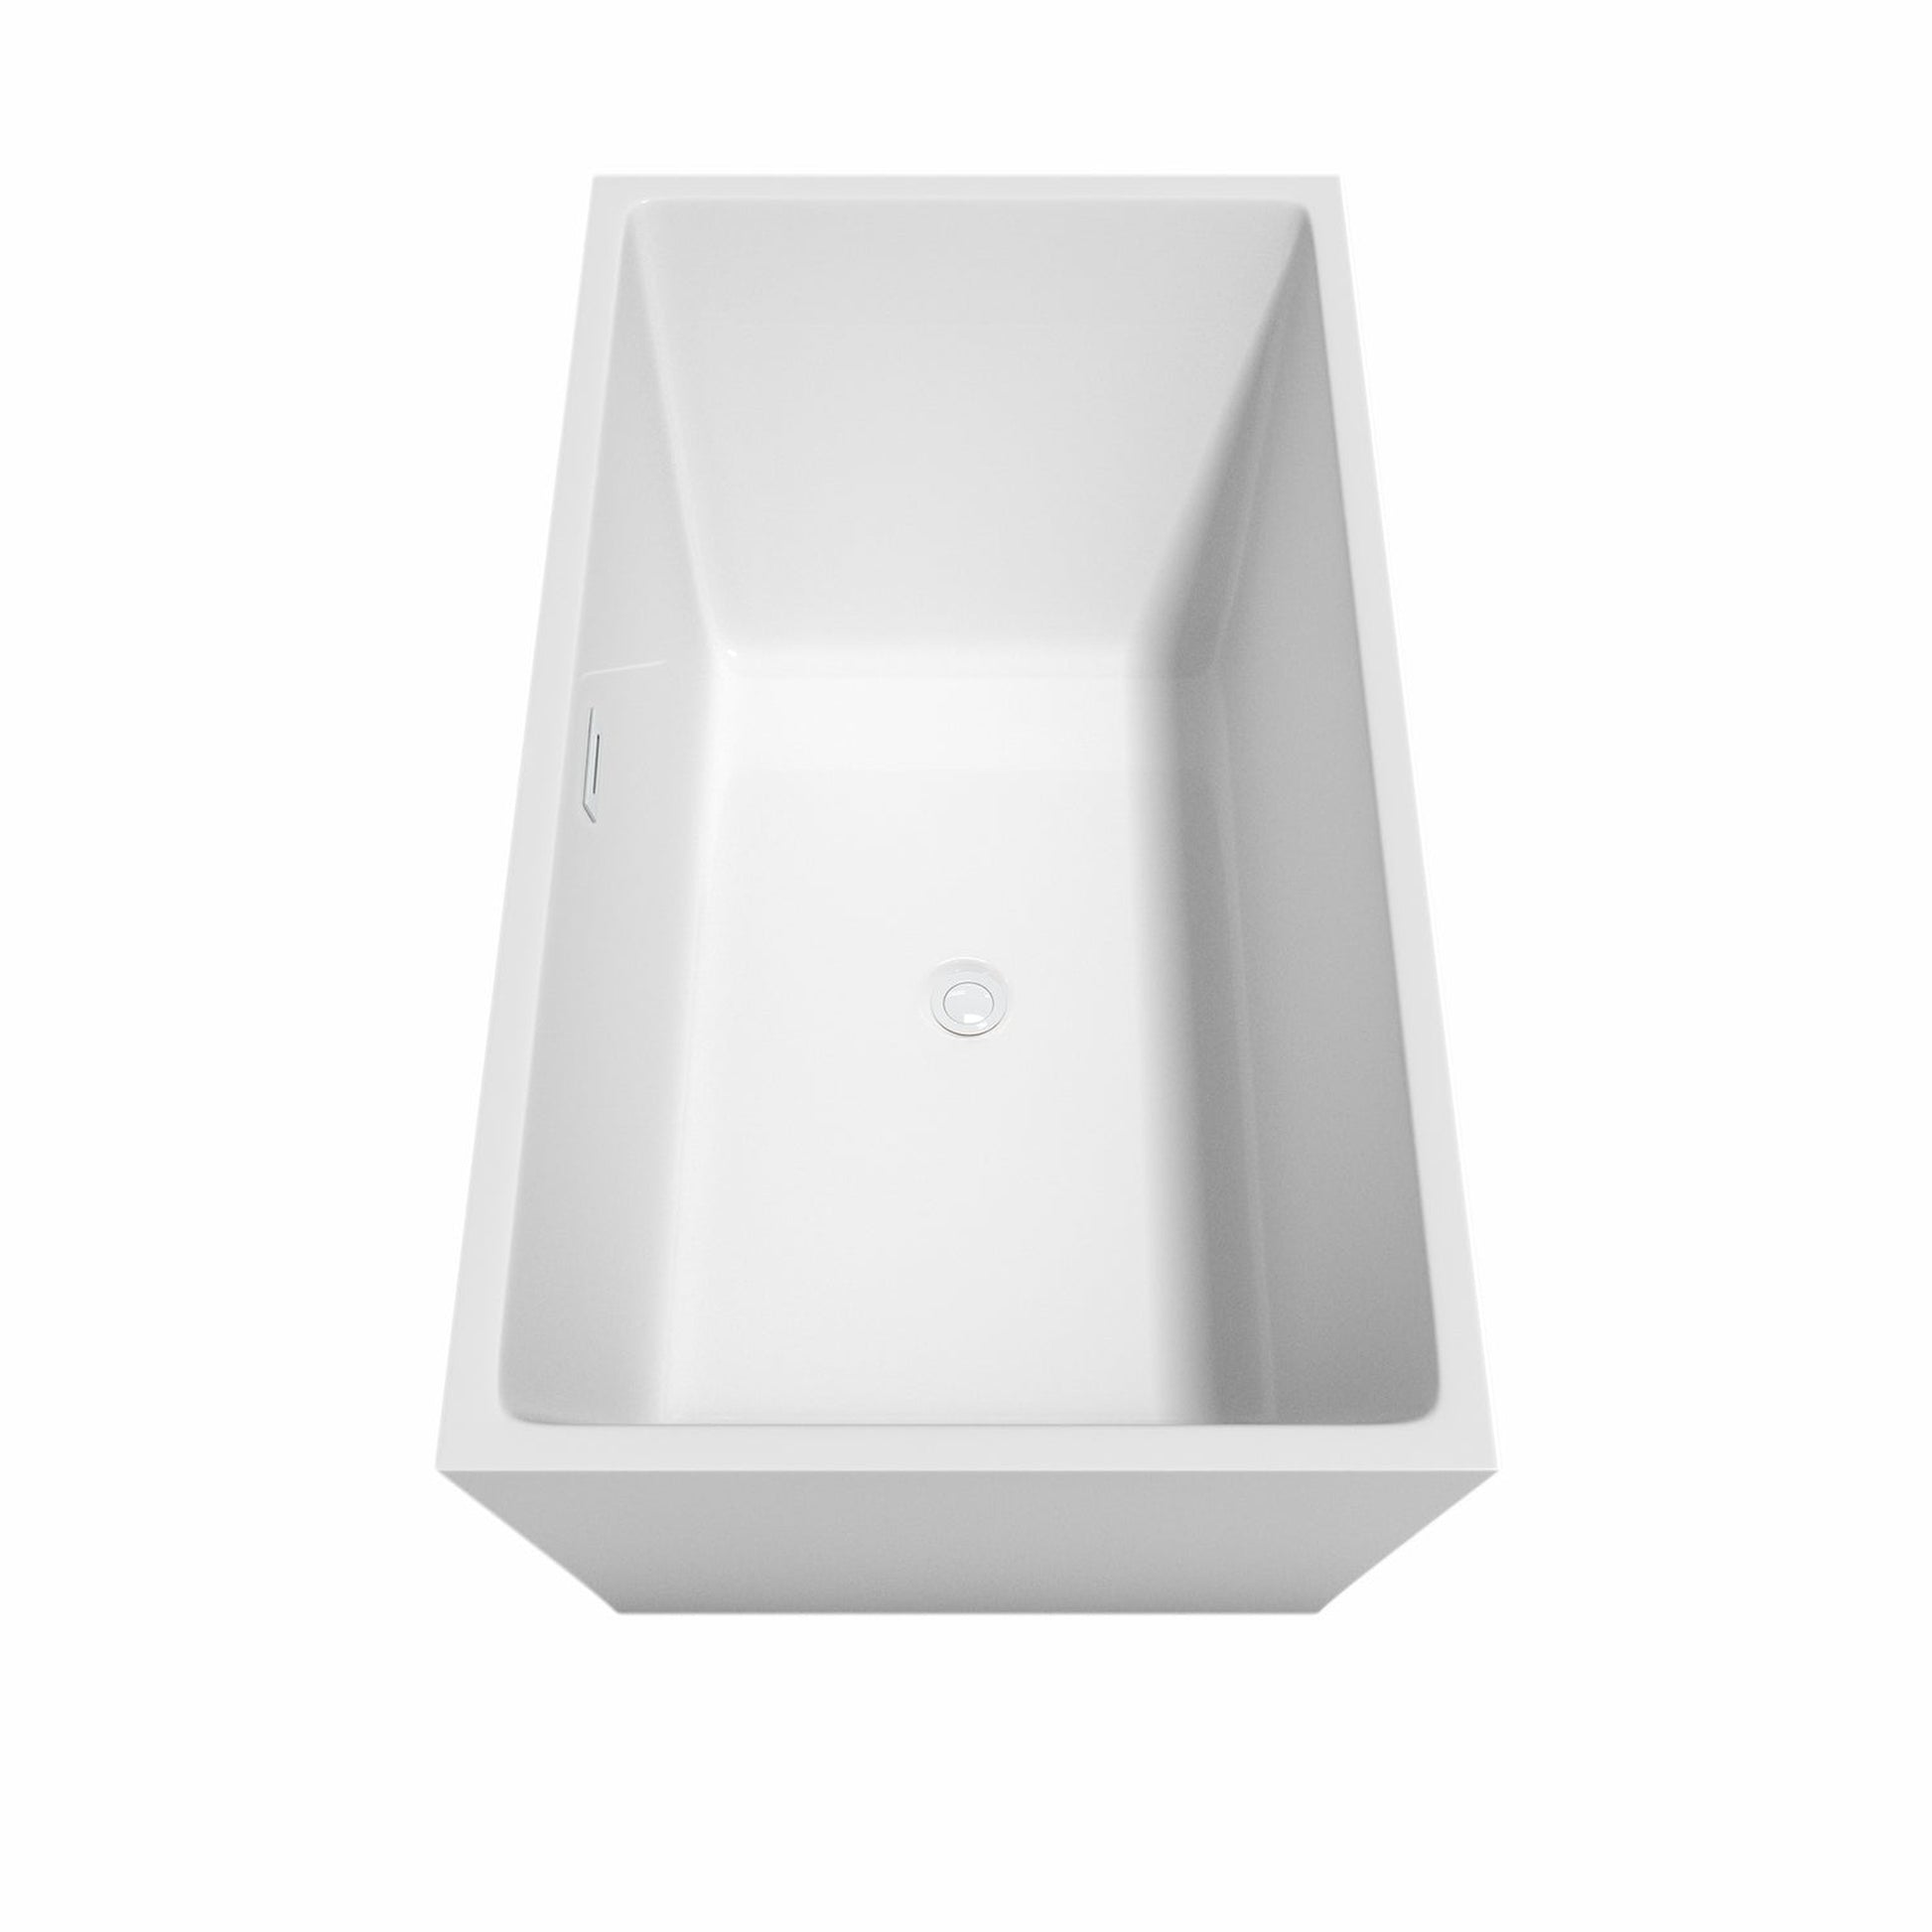 Wyndham Collection Sara 59" Freestanding Bathtub in White With Shiny White Trim and Floor Mounted Faucet in Matte Black